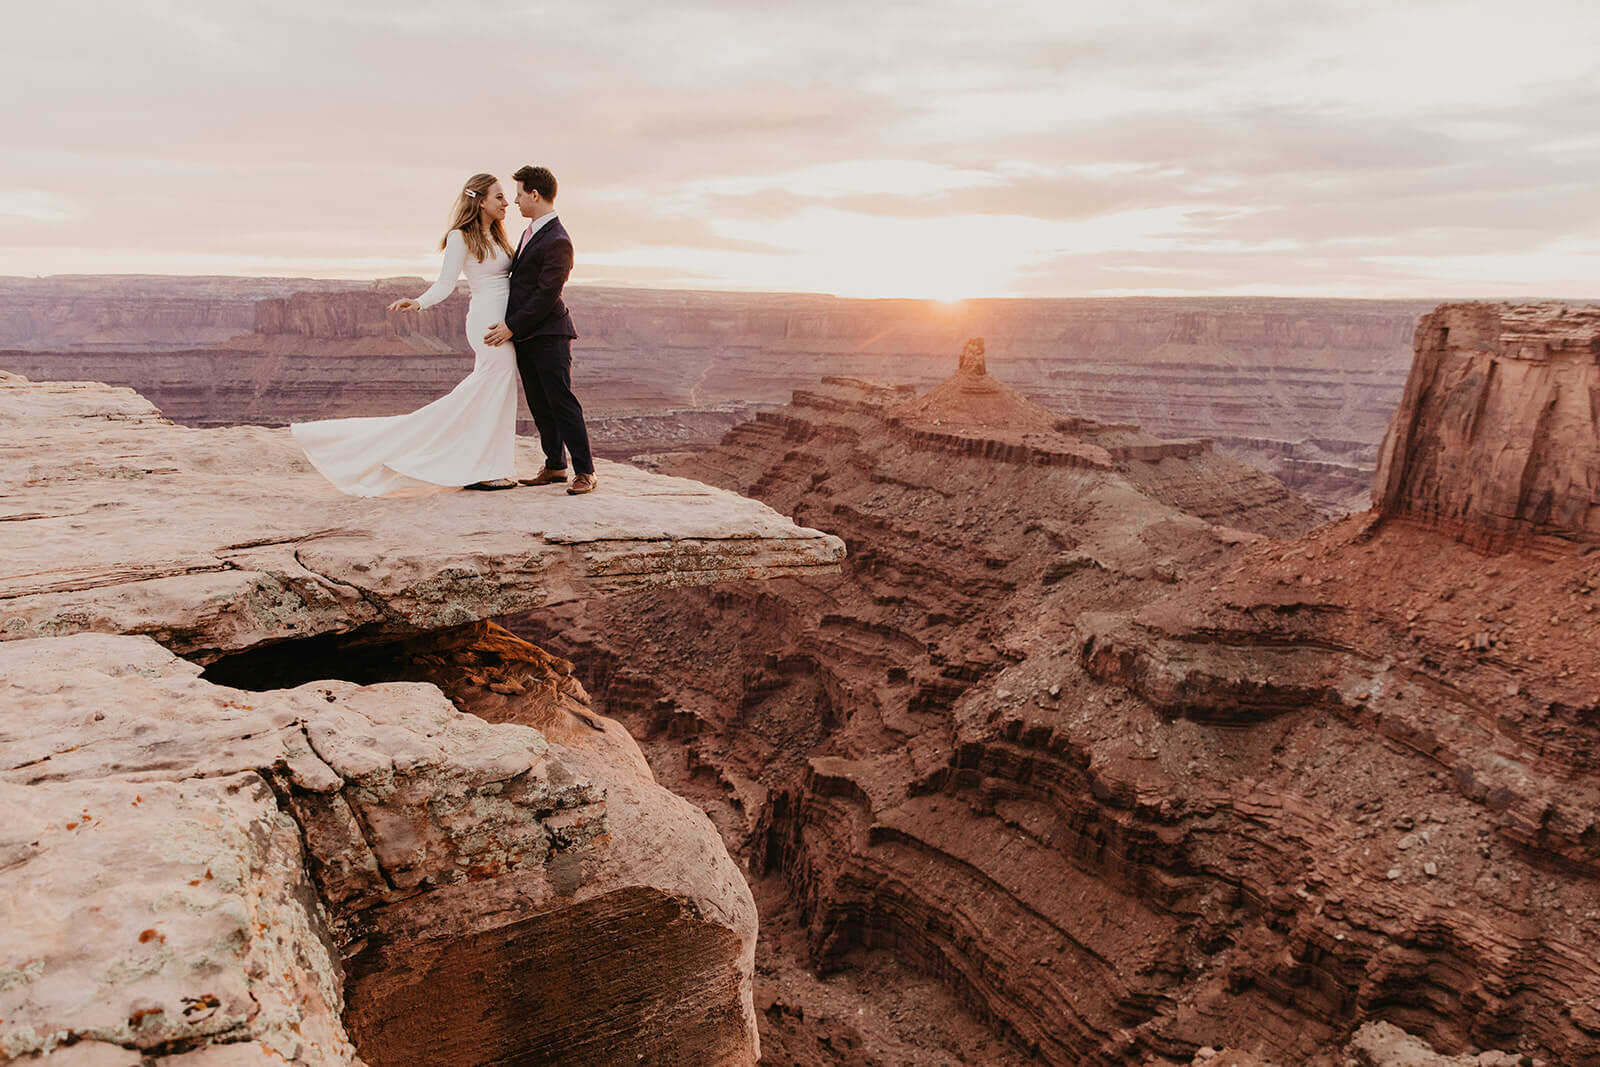  Couple standing on cliff edge during anniversary celebration at sunset at Dead Horse Point State Park and the La Sal Mountains near Moab, Utah with incredible views and hiking. Utah wedding photographer 